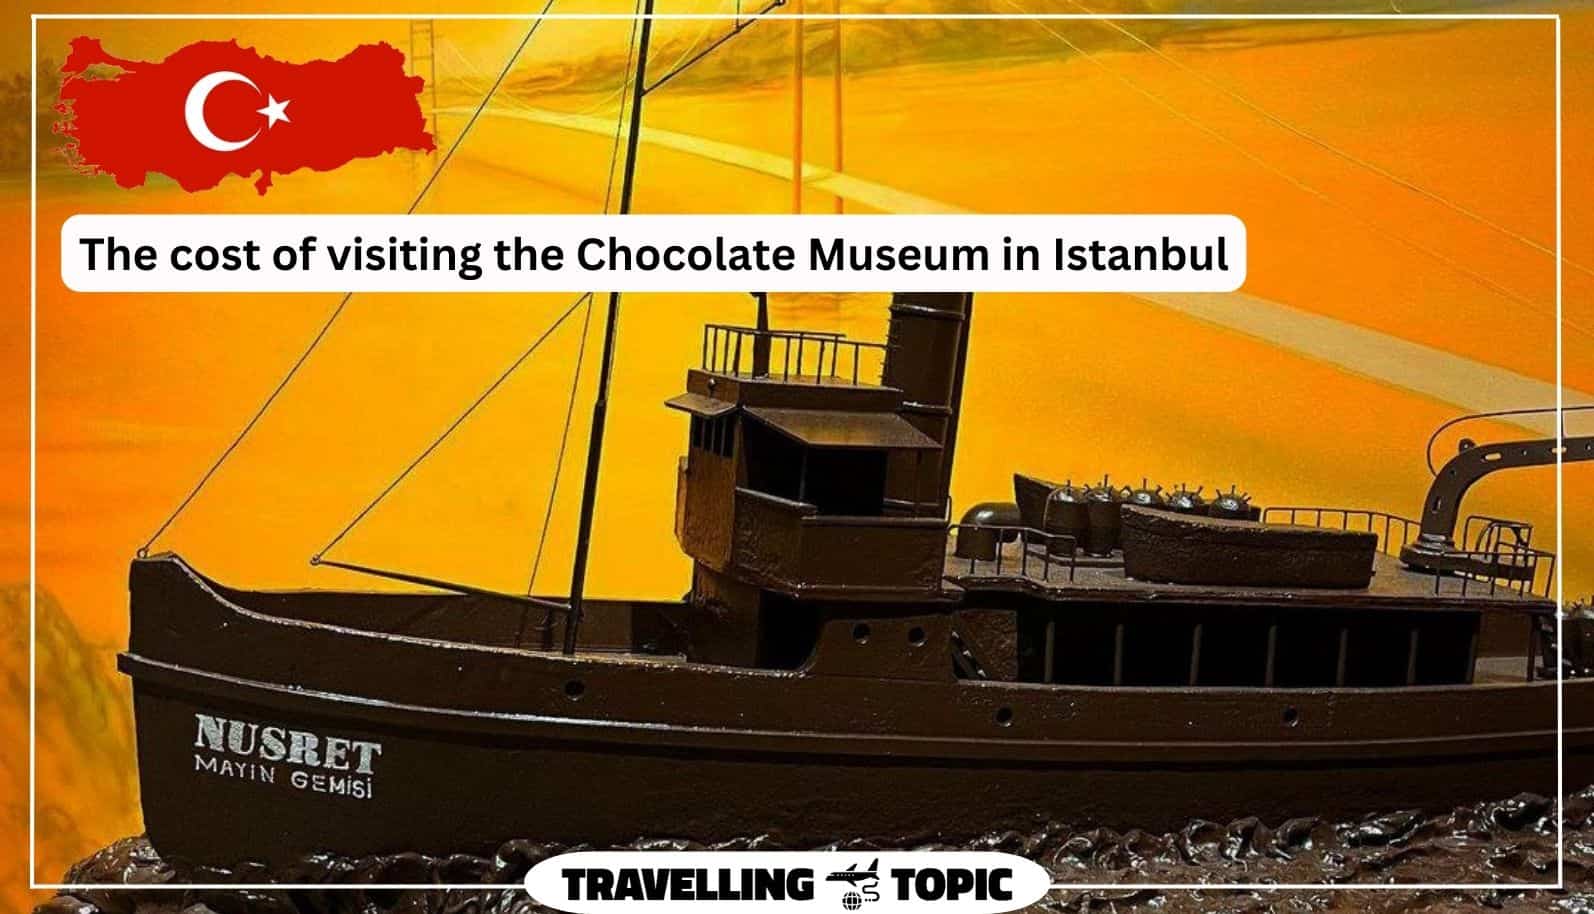 The cost of visiting the Chocolate Museum in Istanbul